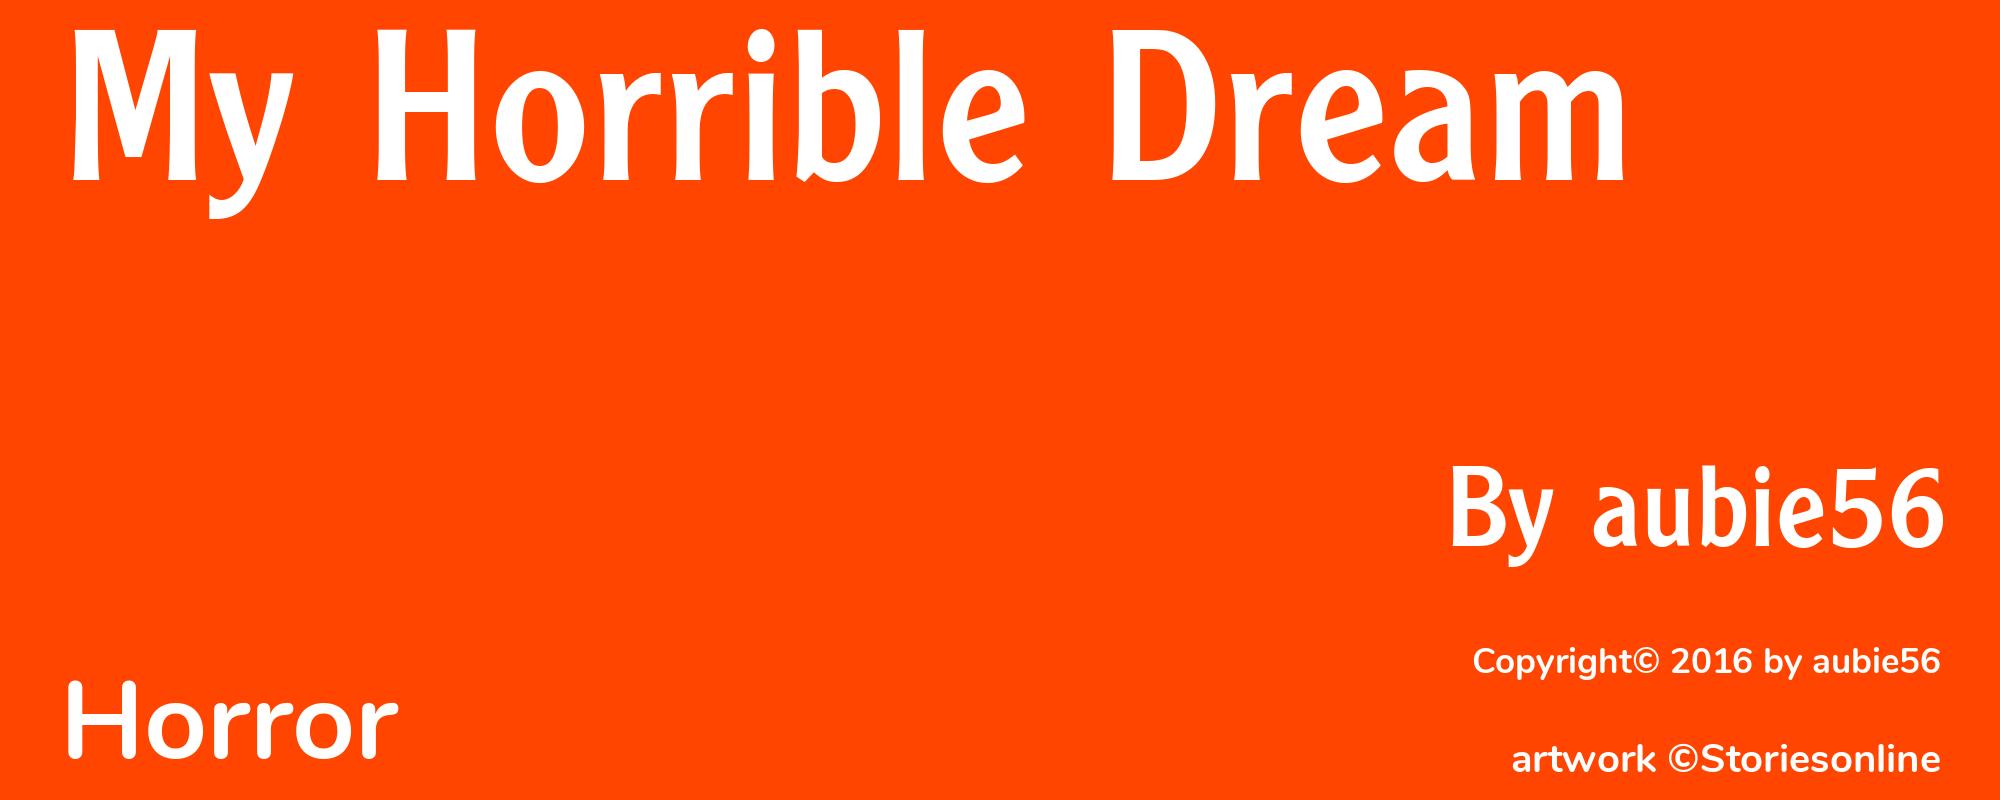 My Horrible Dream - Cover